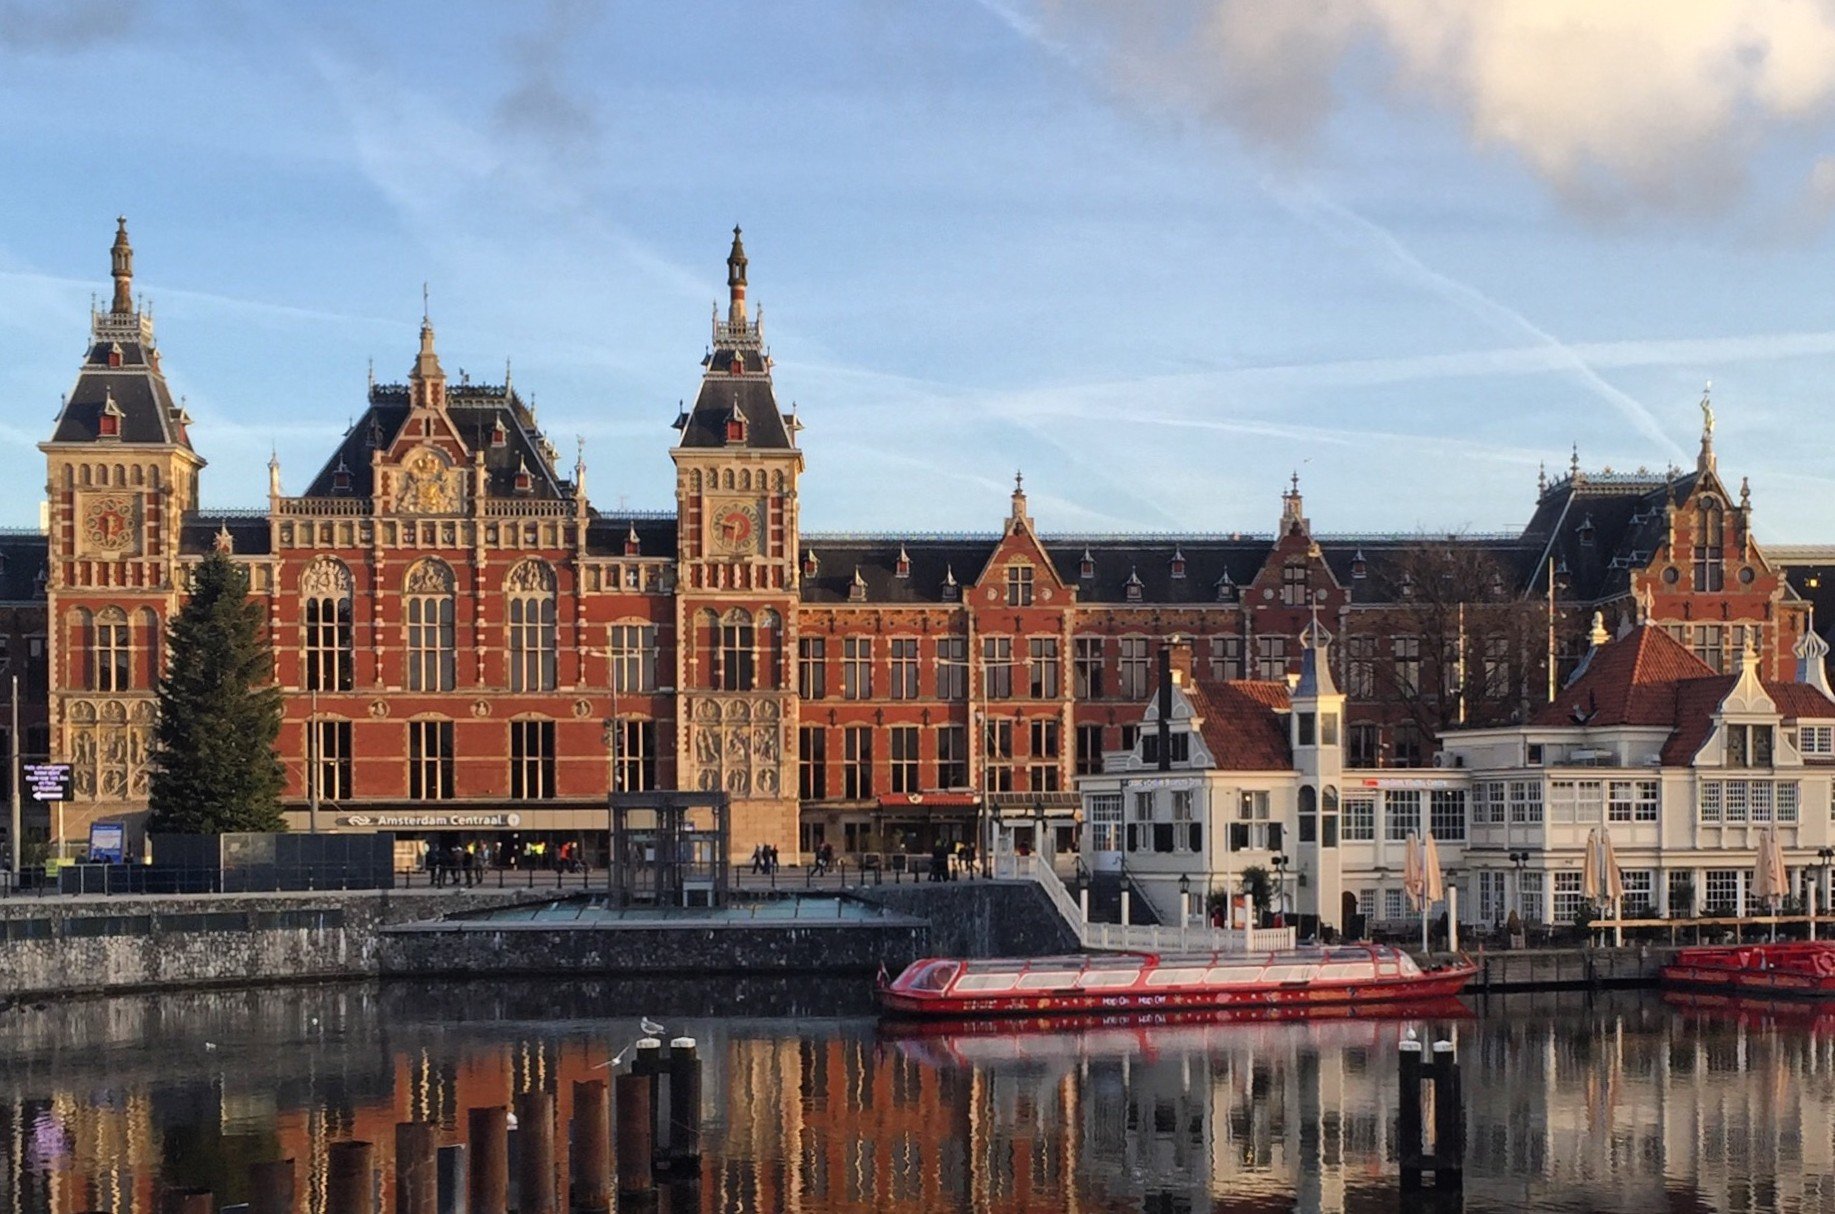 24 Hours of Sightseeing the Unexpected in Amsterdam